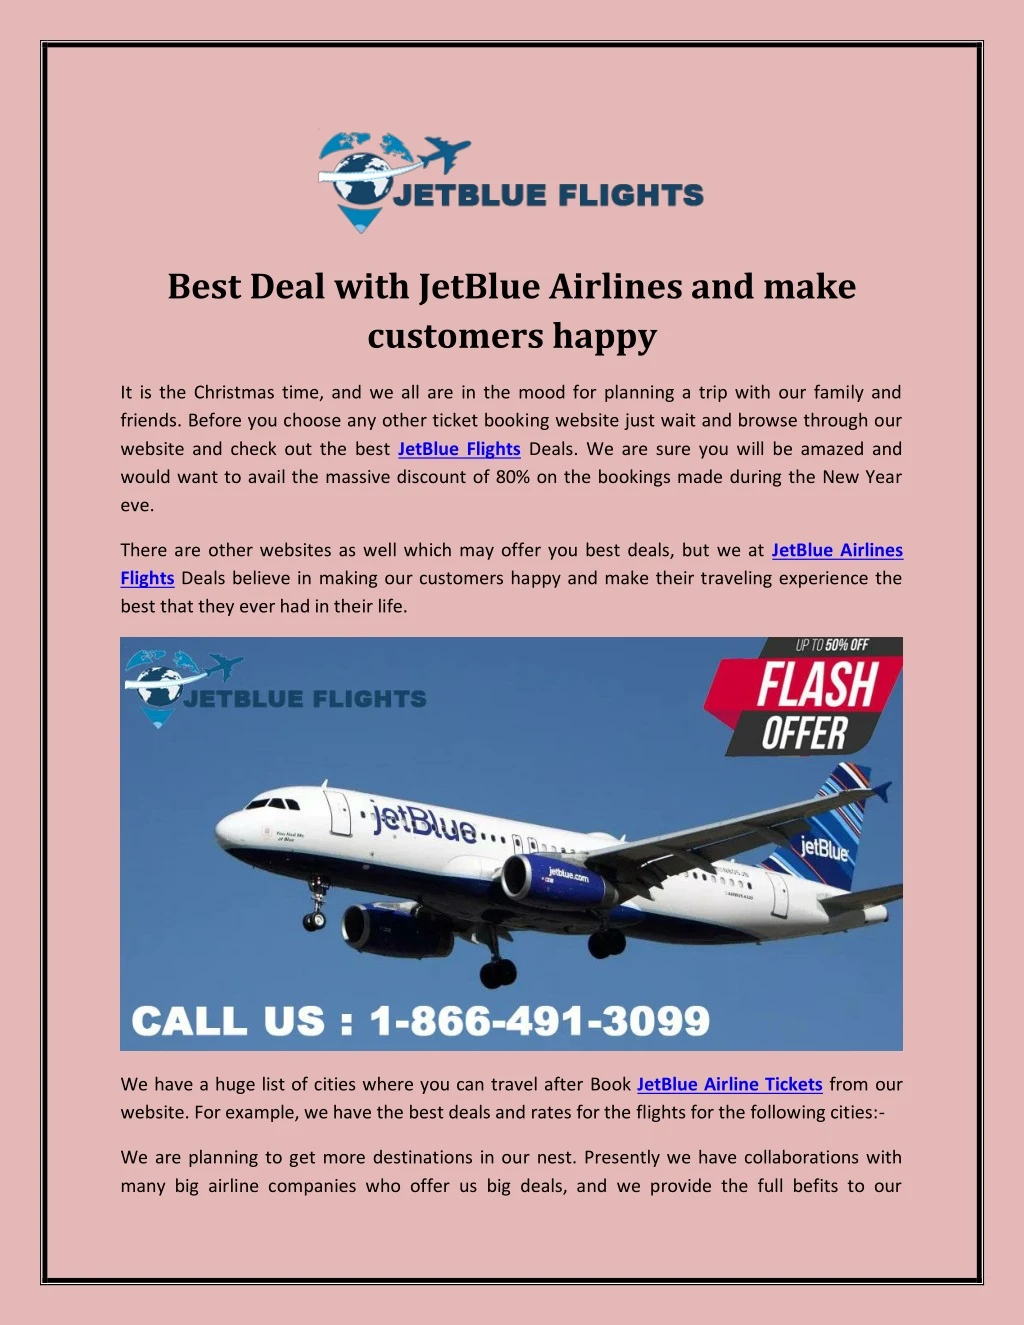 best deal with jetblue airlines and make